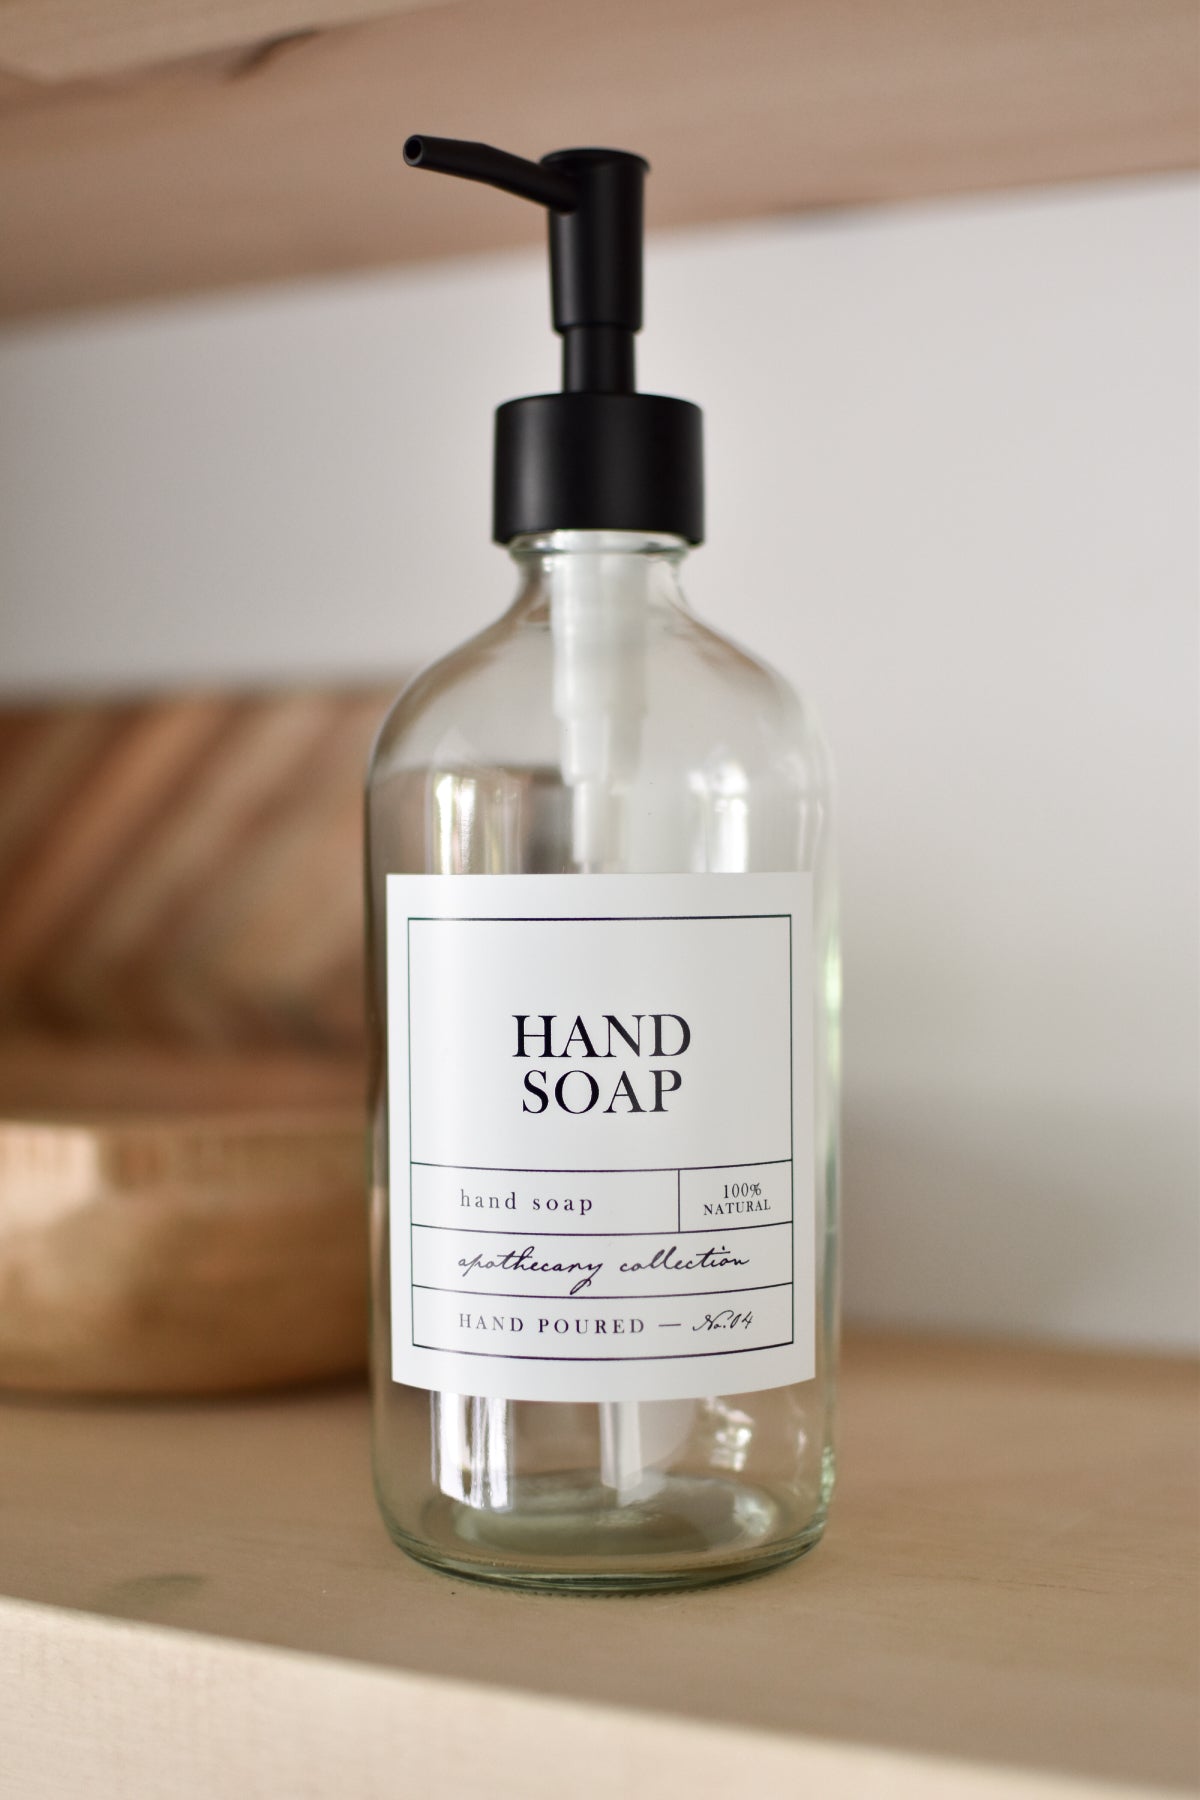 16oz Clear Glass Bottle - Hand Soap - Apothecary Style